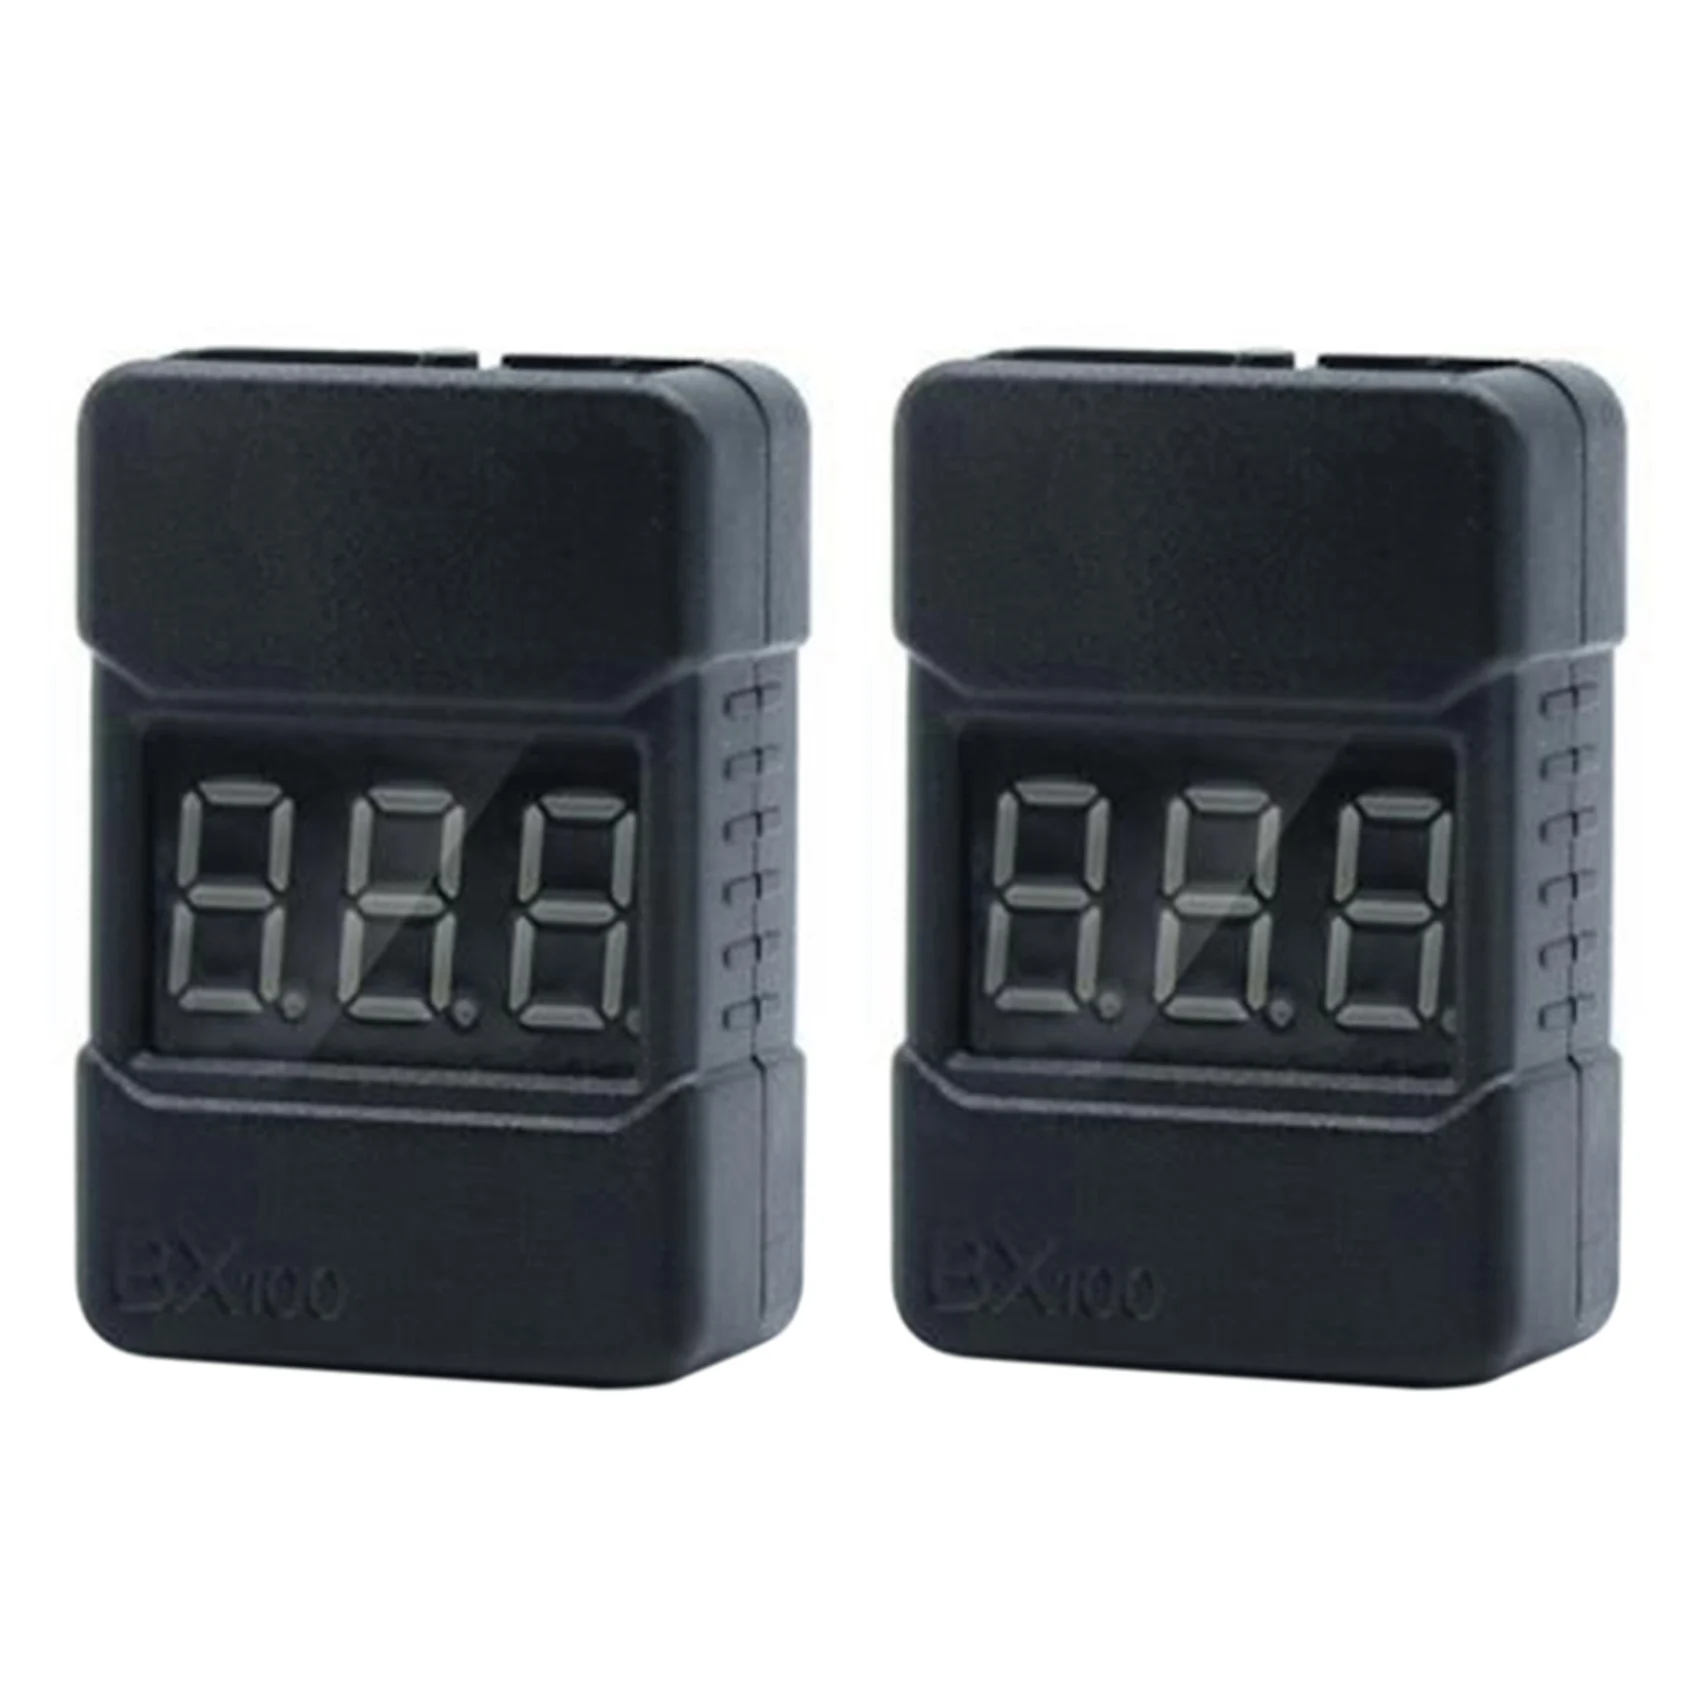 

2X BX100 LED Display Battery Tester Low Voltage Buzzer Alarm with ABS Shell Super Sound Warning Checker Black